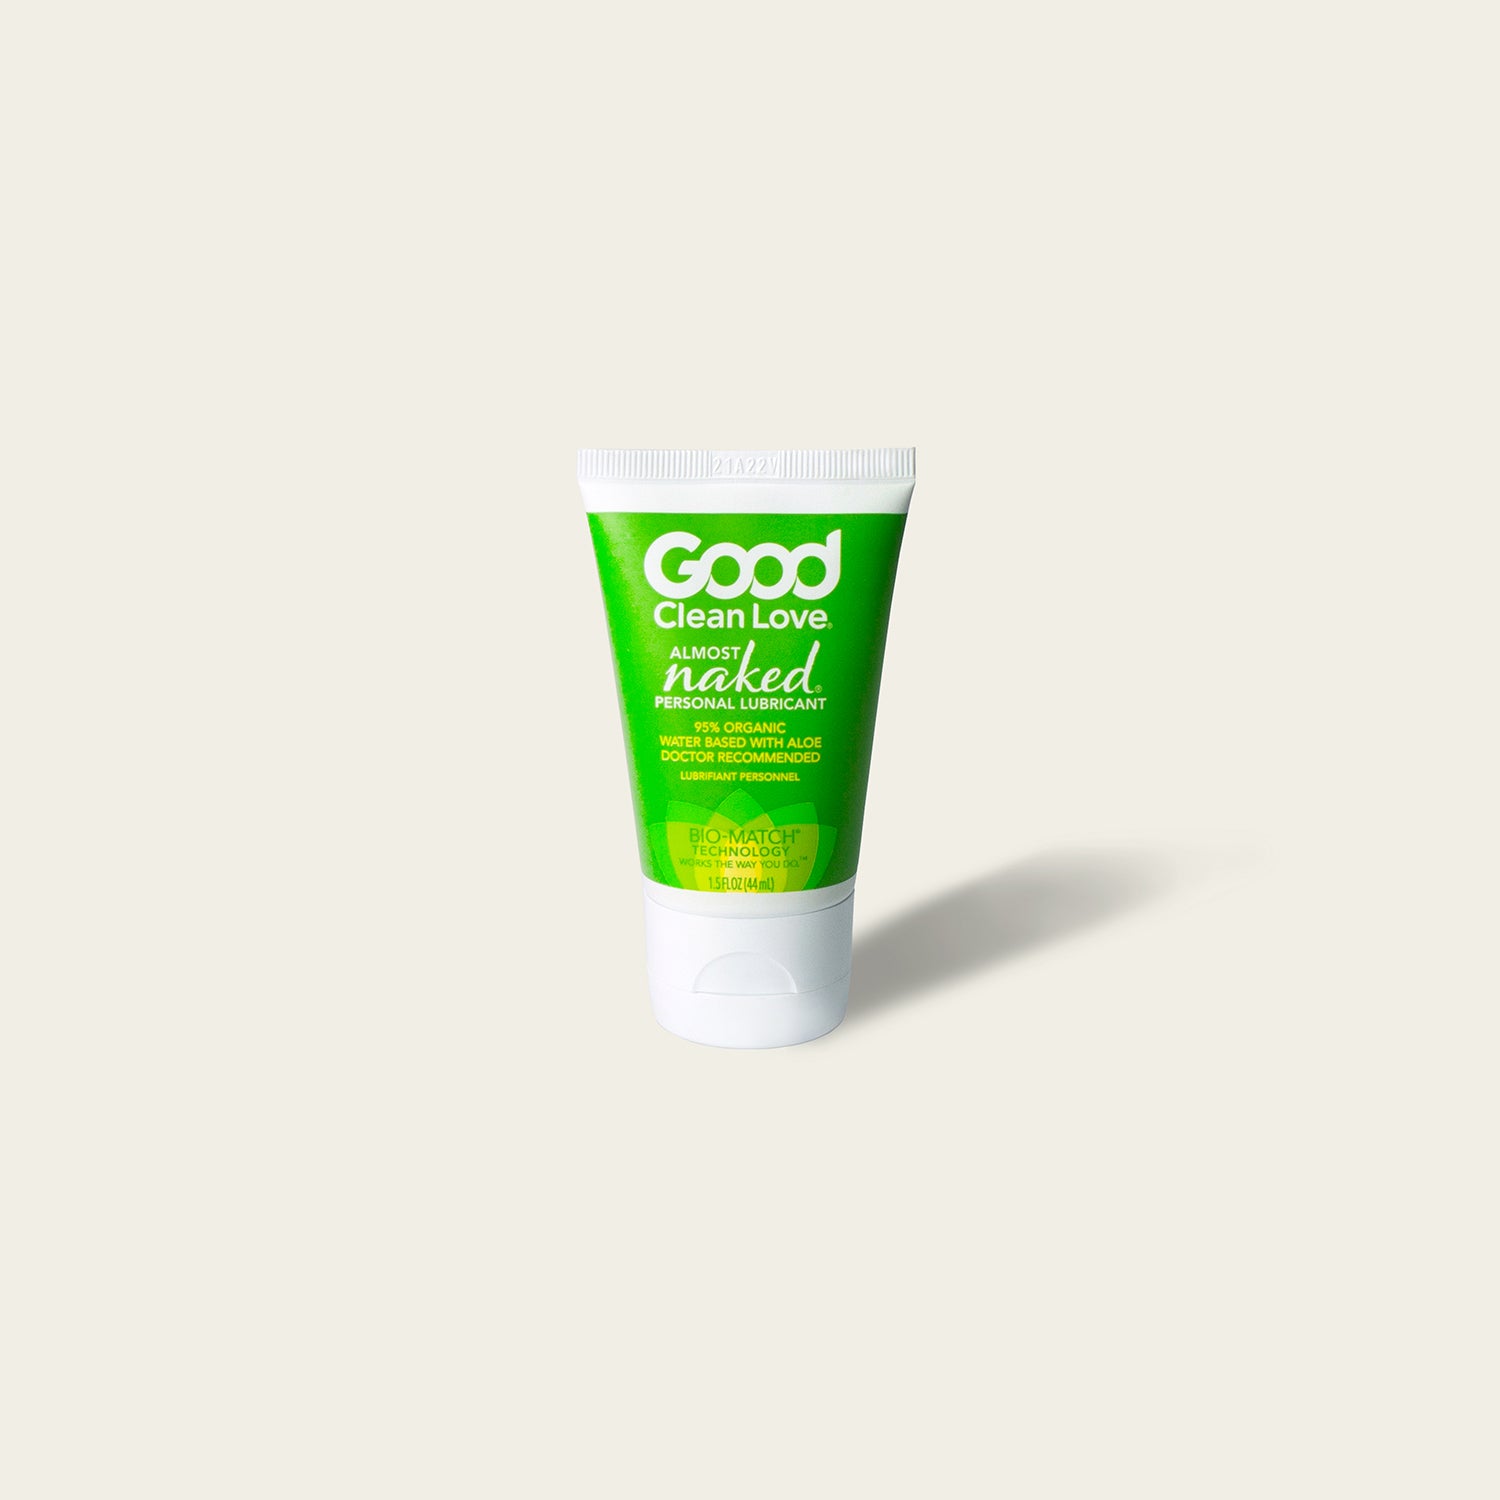 Good Clean Love BioNude Ultra Sensitive Personal Lubricant, 3 oz  Ingredients and Reviews